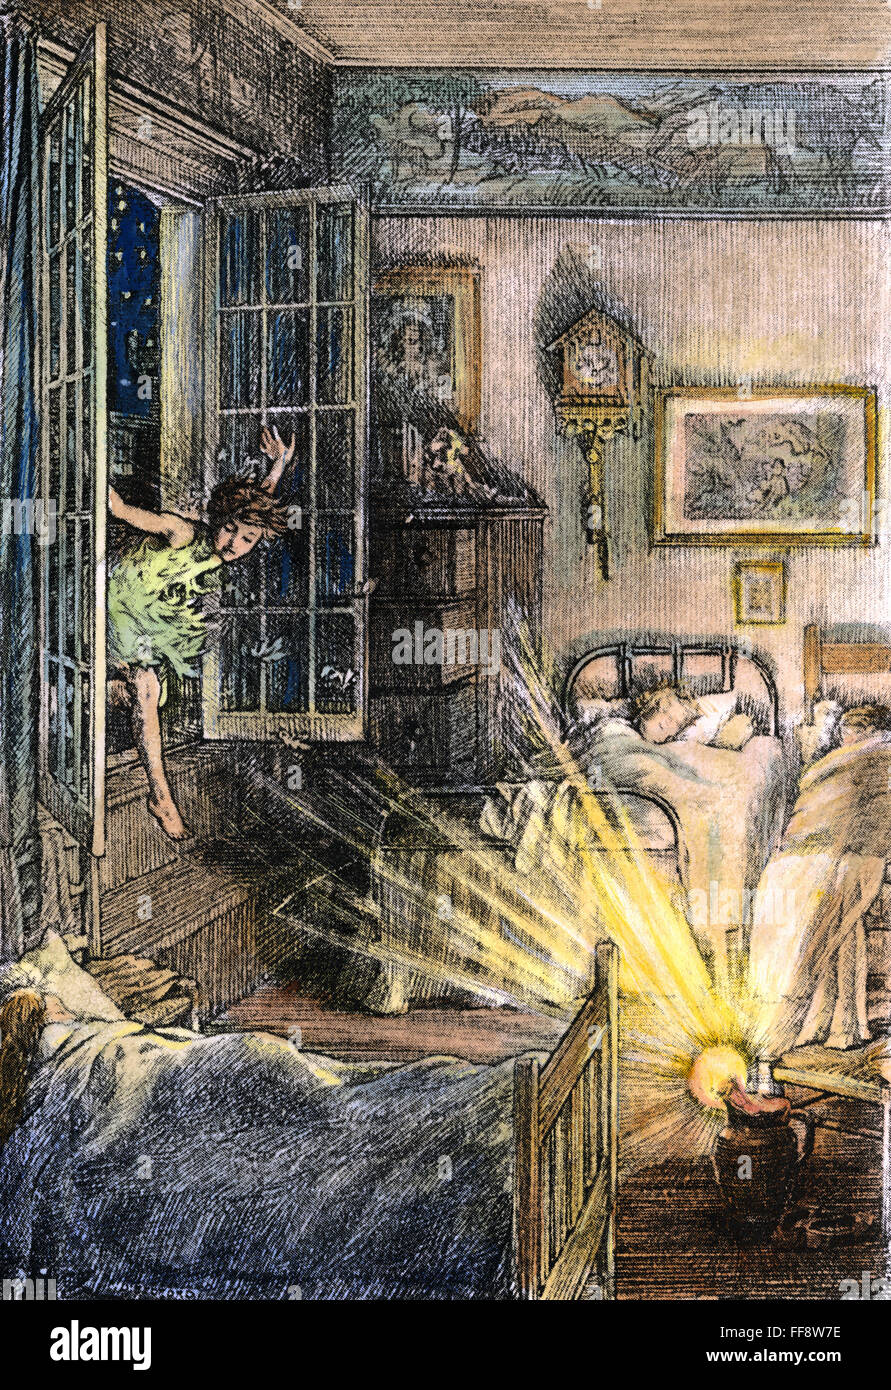 BARRIE: PETER PAN, 1911.  /nPeter flies into the nursery. Drawing by Francis D. Bedford for the 1911 edition of J.M. Barrie's 'Peter Pan.' Stock Photo